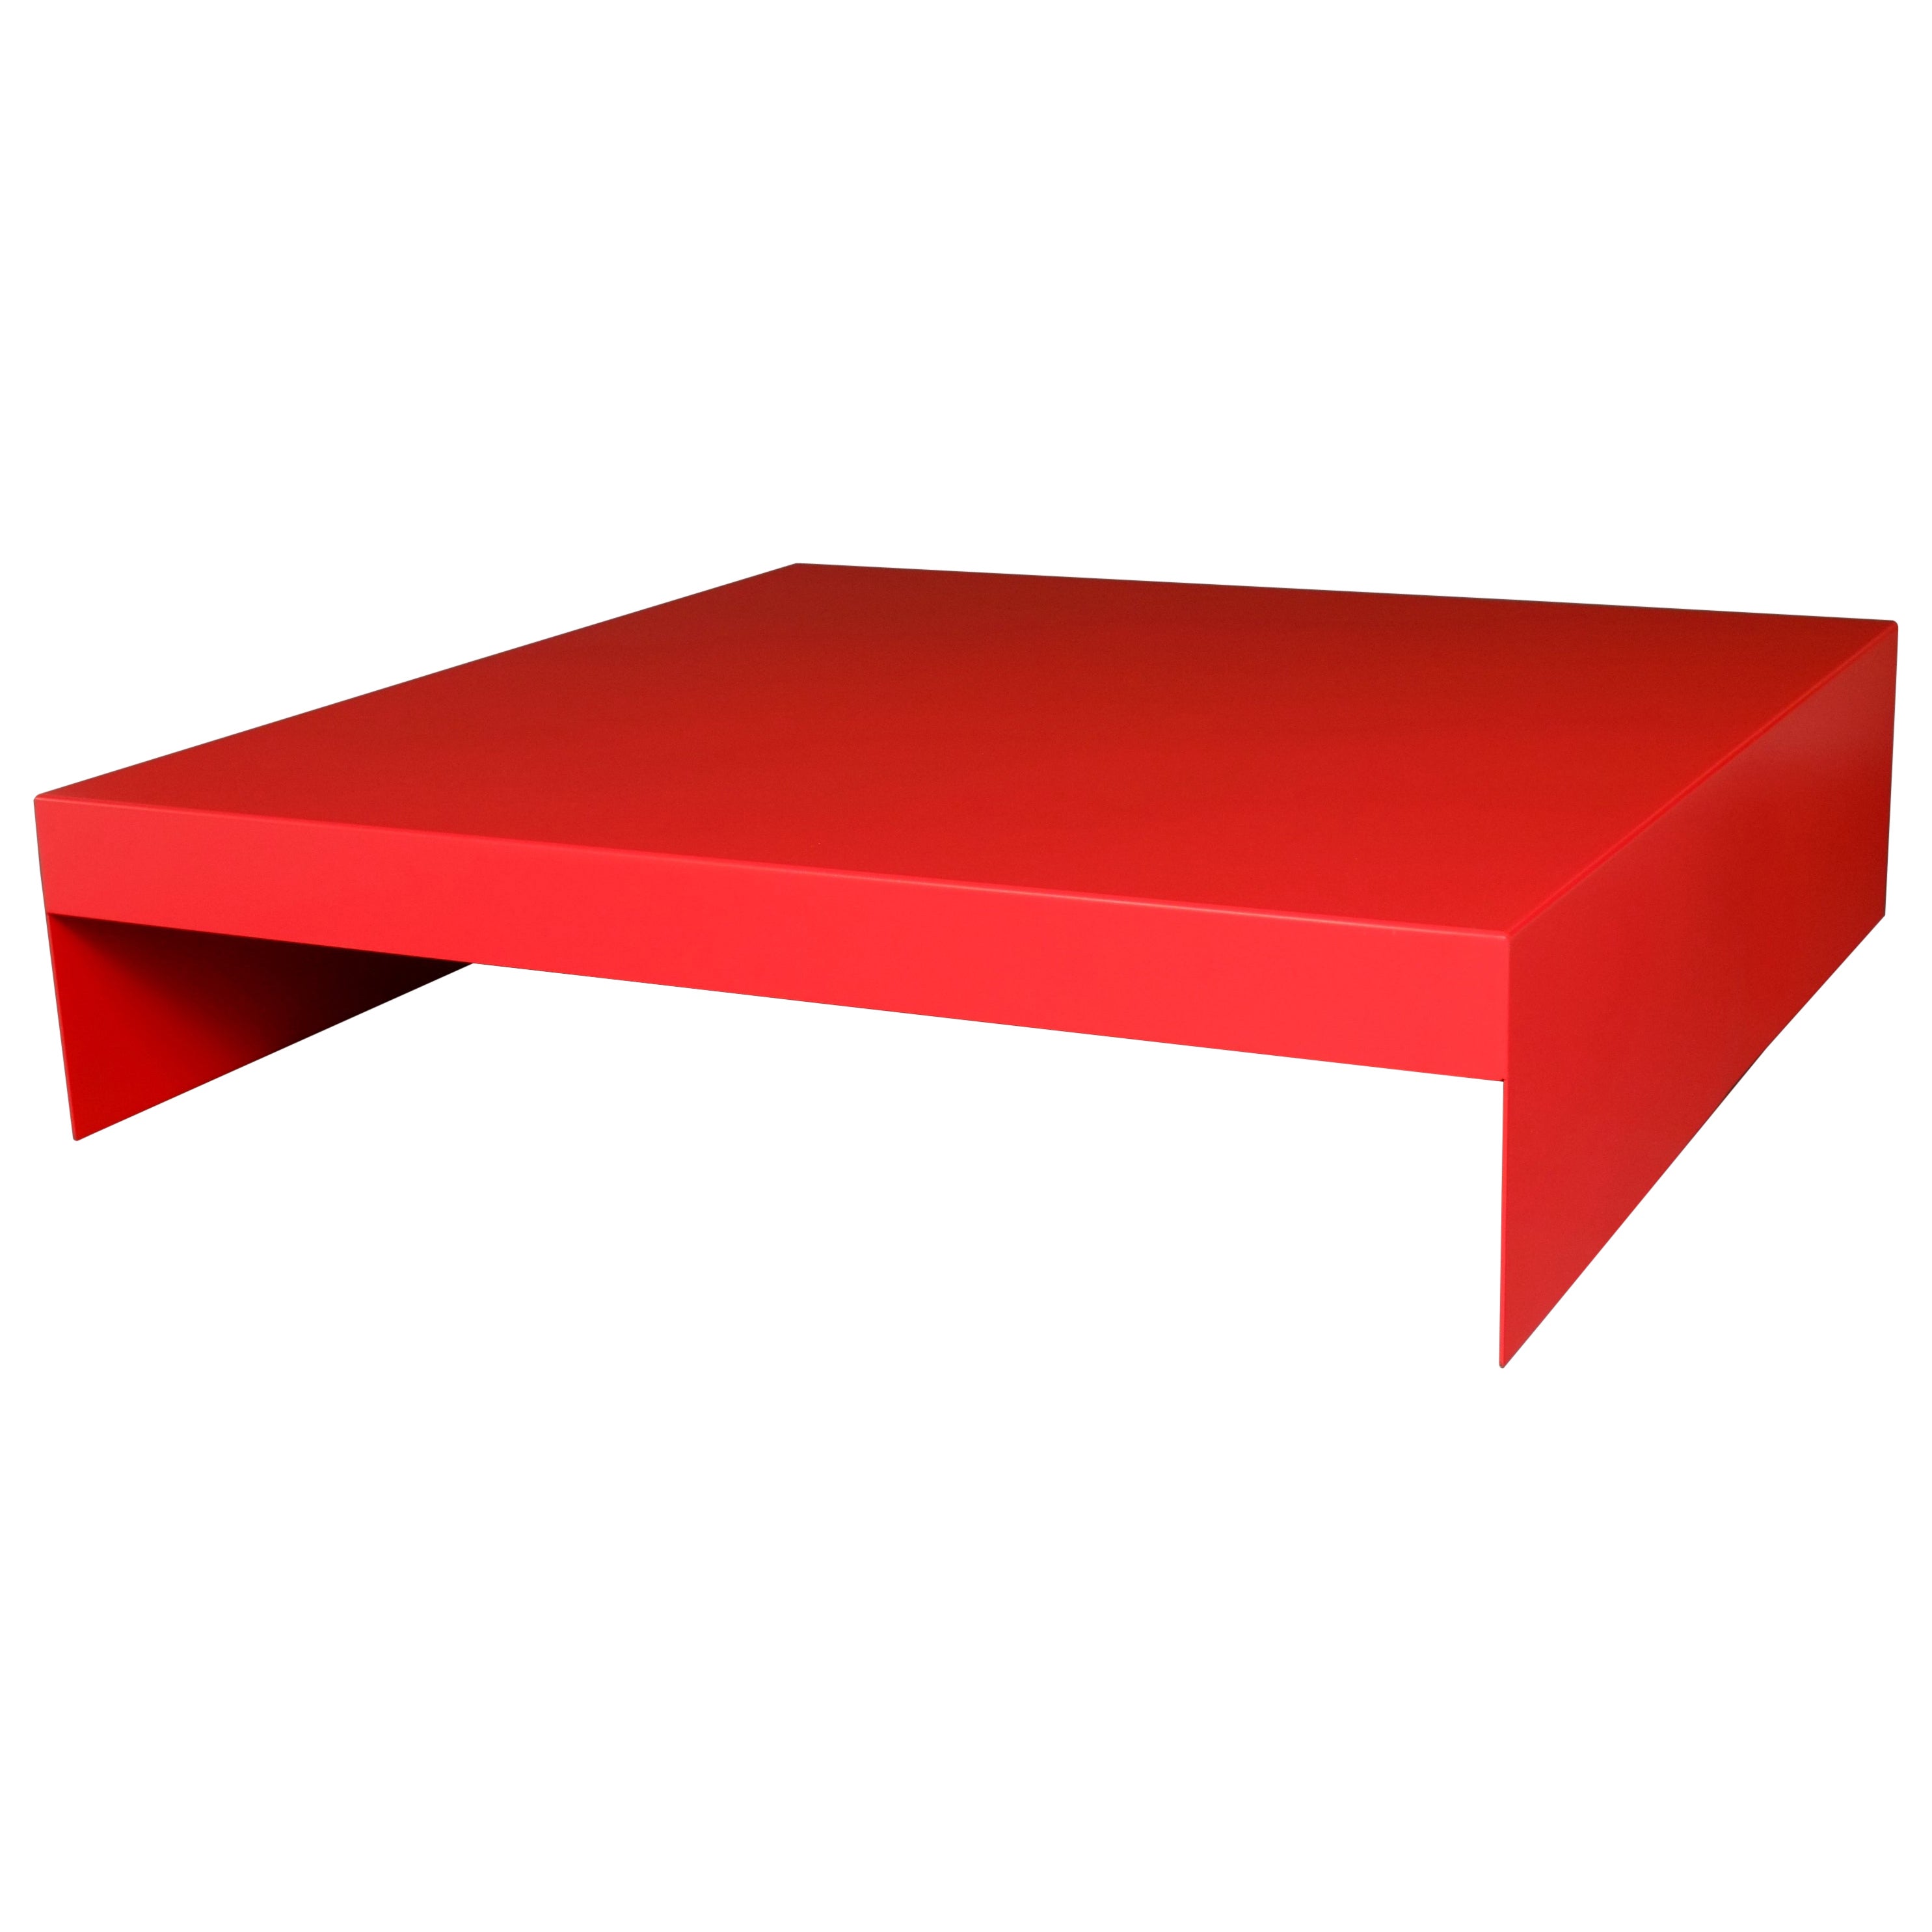 Bespoke Large Square Single Form Coffee Table in Aluminium - Customisable For Sale